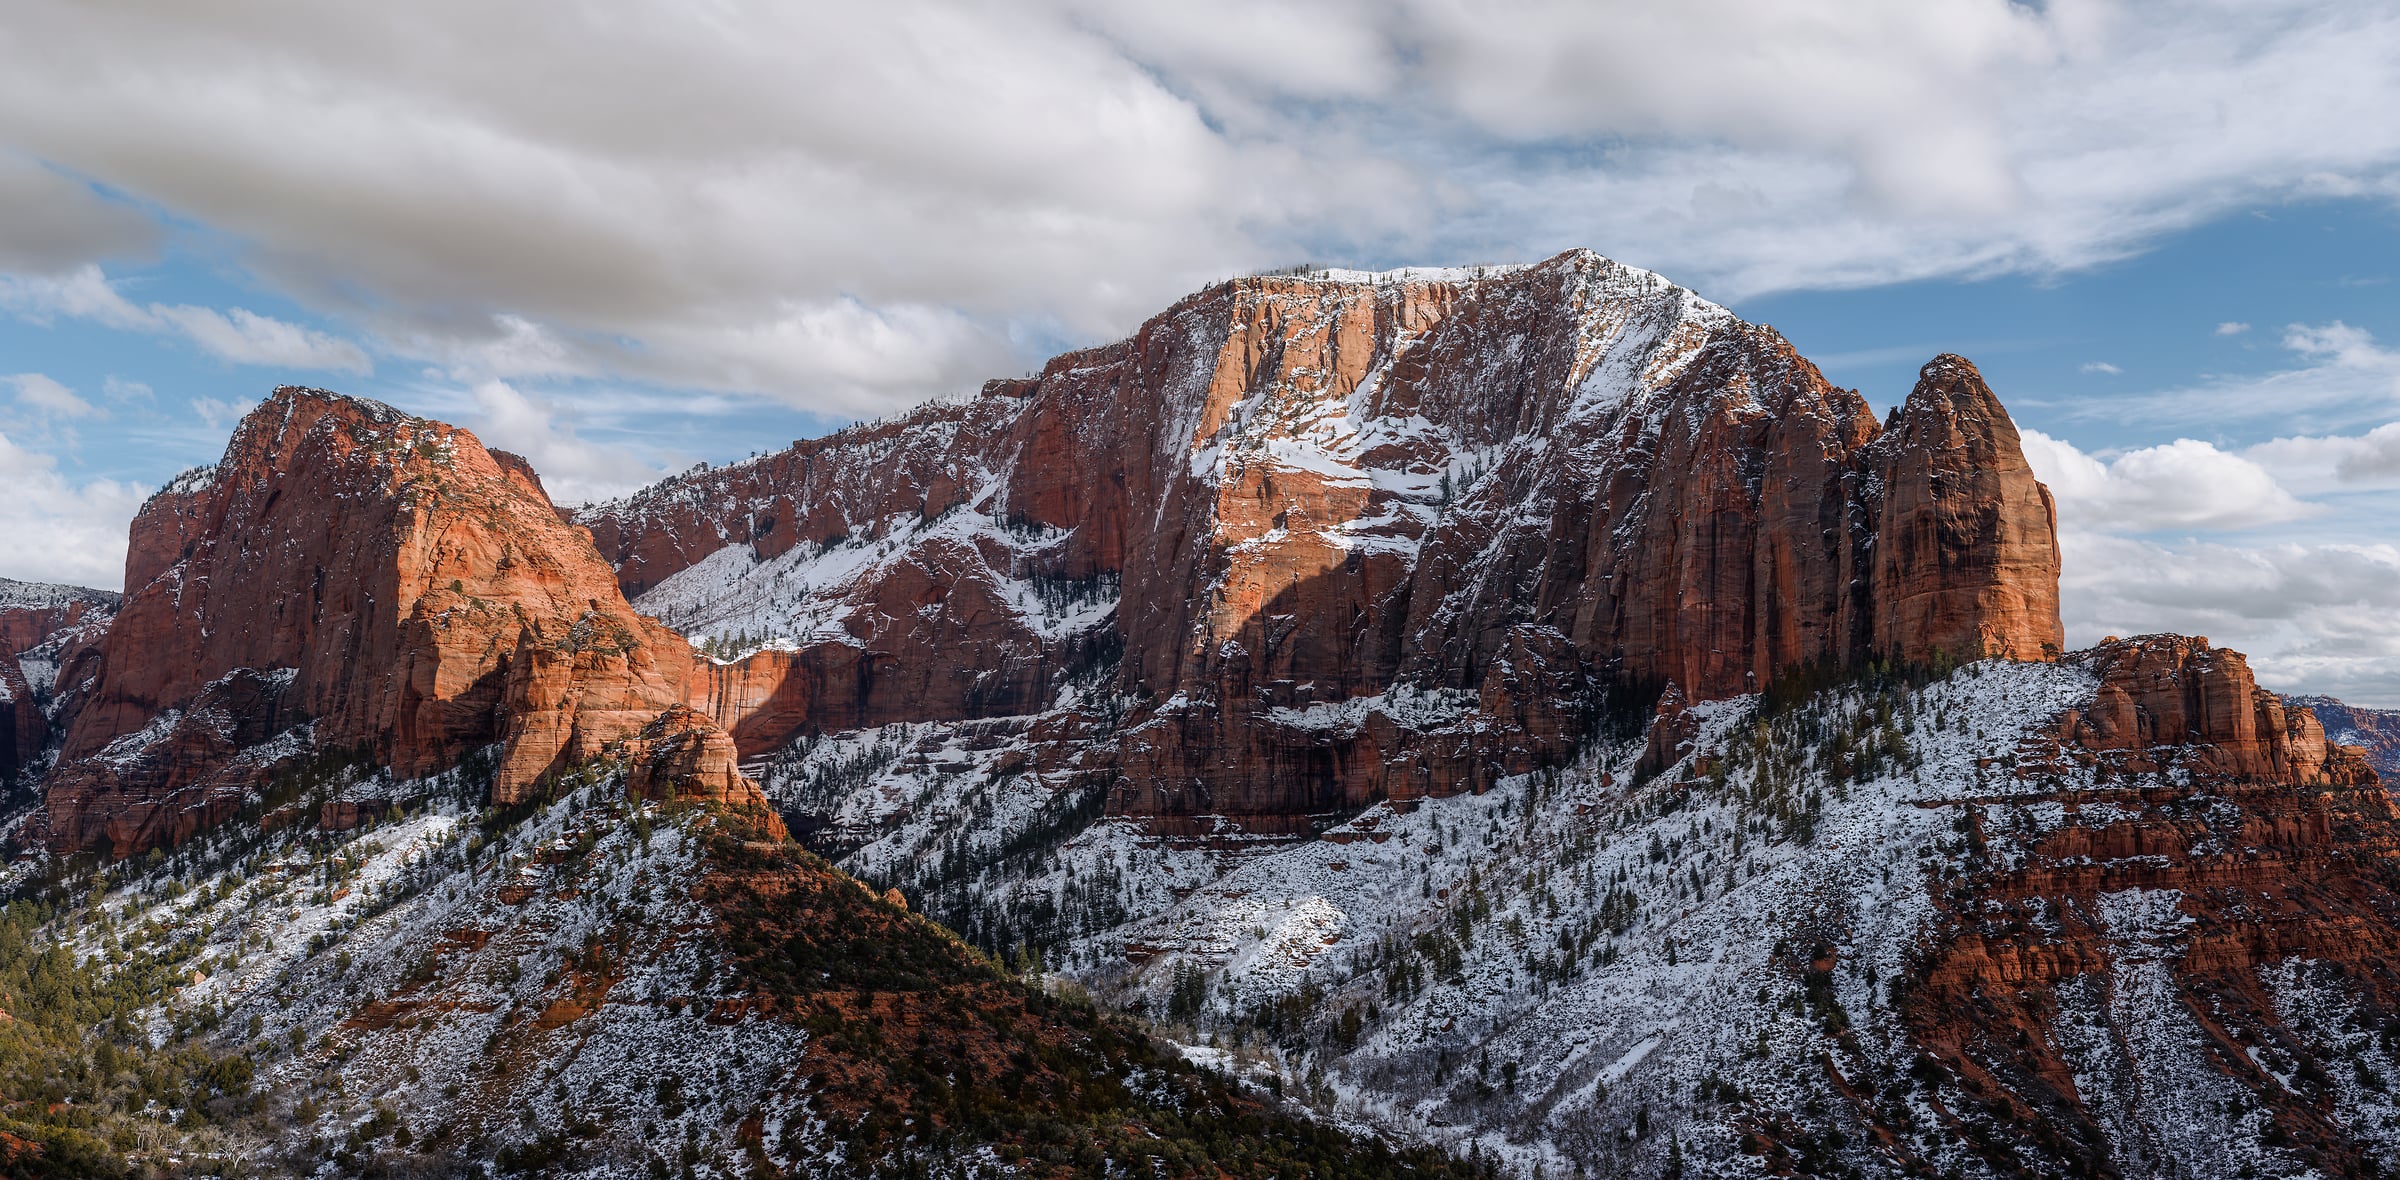 485 megapixels! A very high resolution, large-format VAST photo print of the rock formations of Kolob Canyons in Zion National Park covered in snow; landscape photograph created by Chris Blake in Zion National Park, Utah.